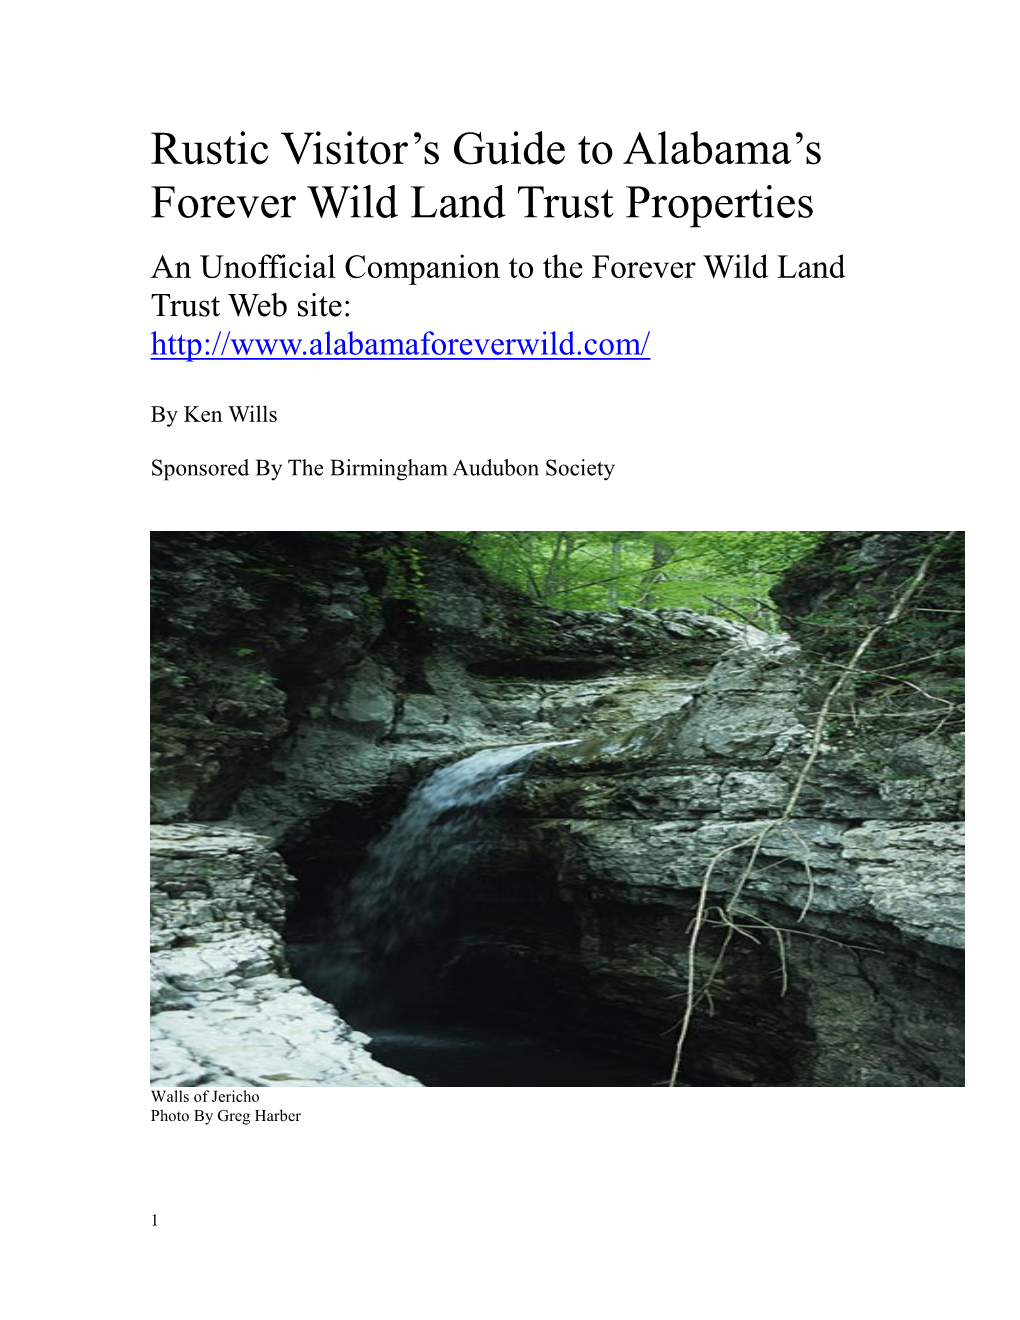 Rustic Visitor's Guide to Alabama's Forever Wild Land Trust Properties